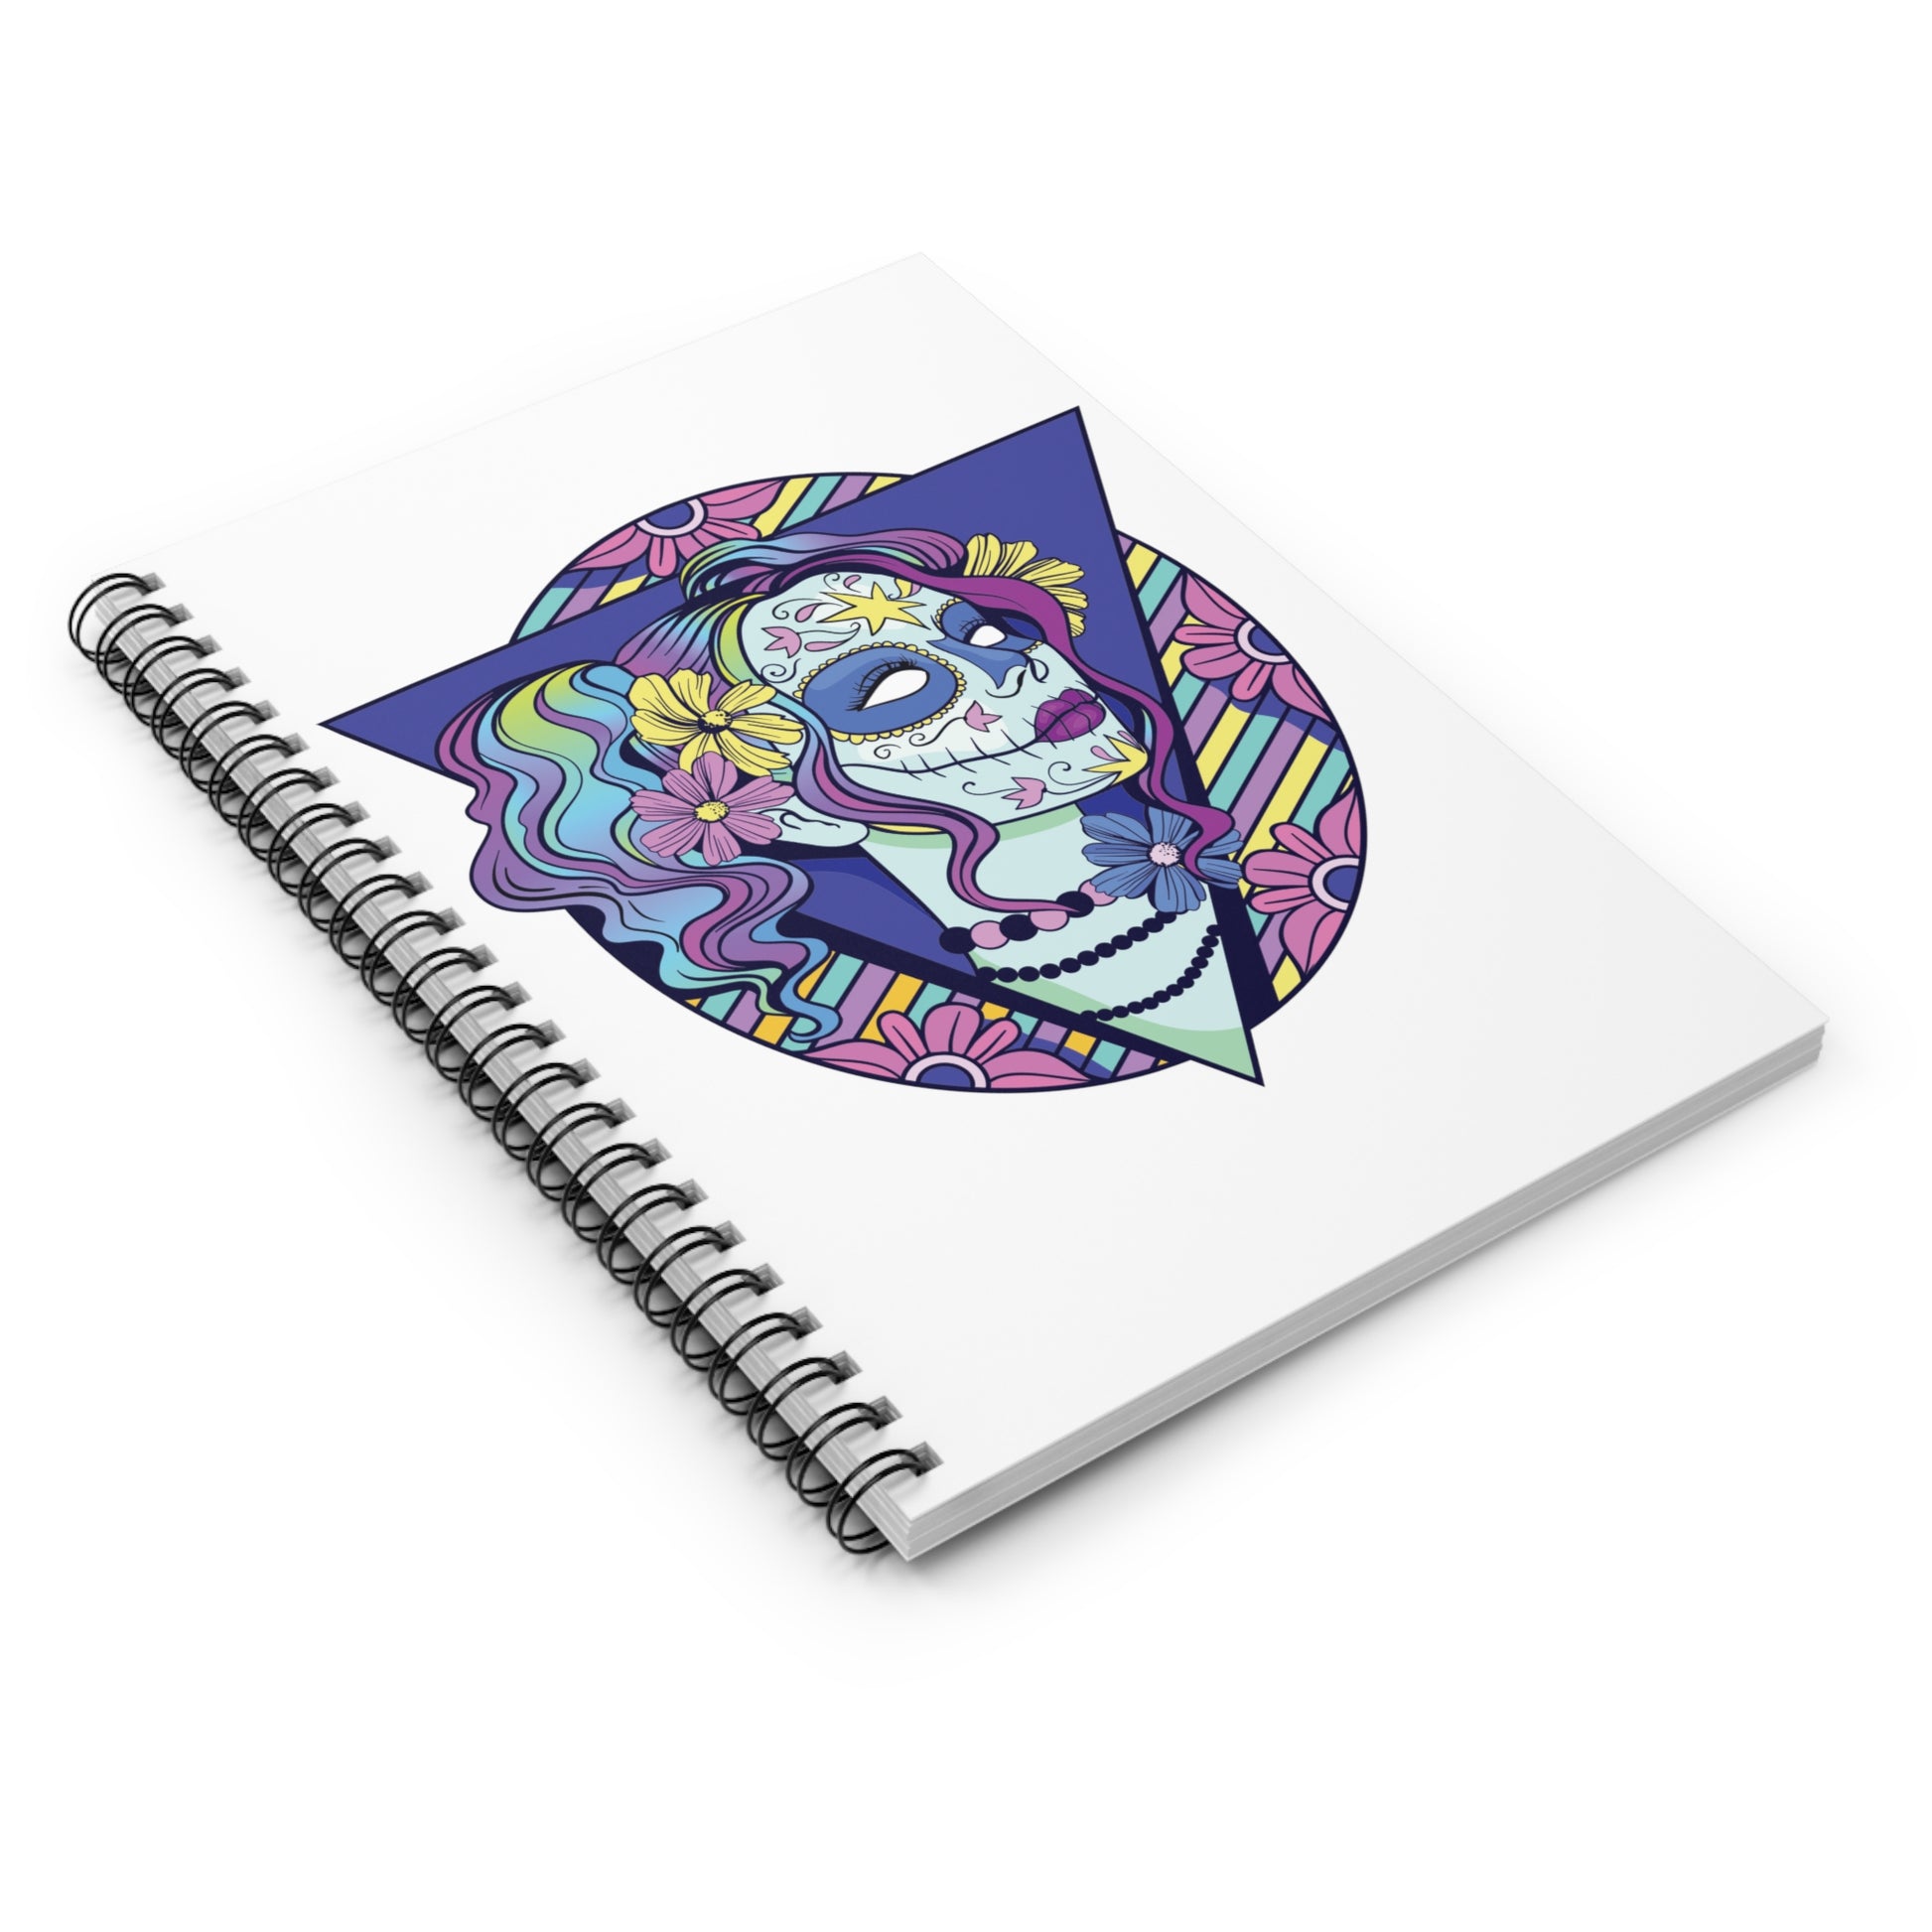 Candy Skull: Spiral Notebook - Log Books - Journals - Diaries - and More Custom Printed by TheGlassyLass